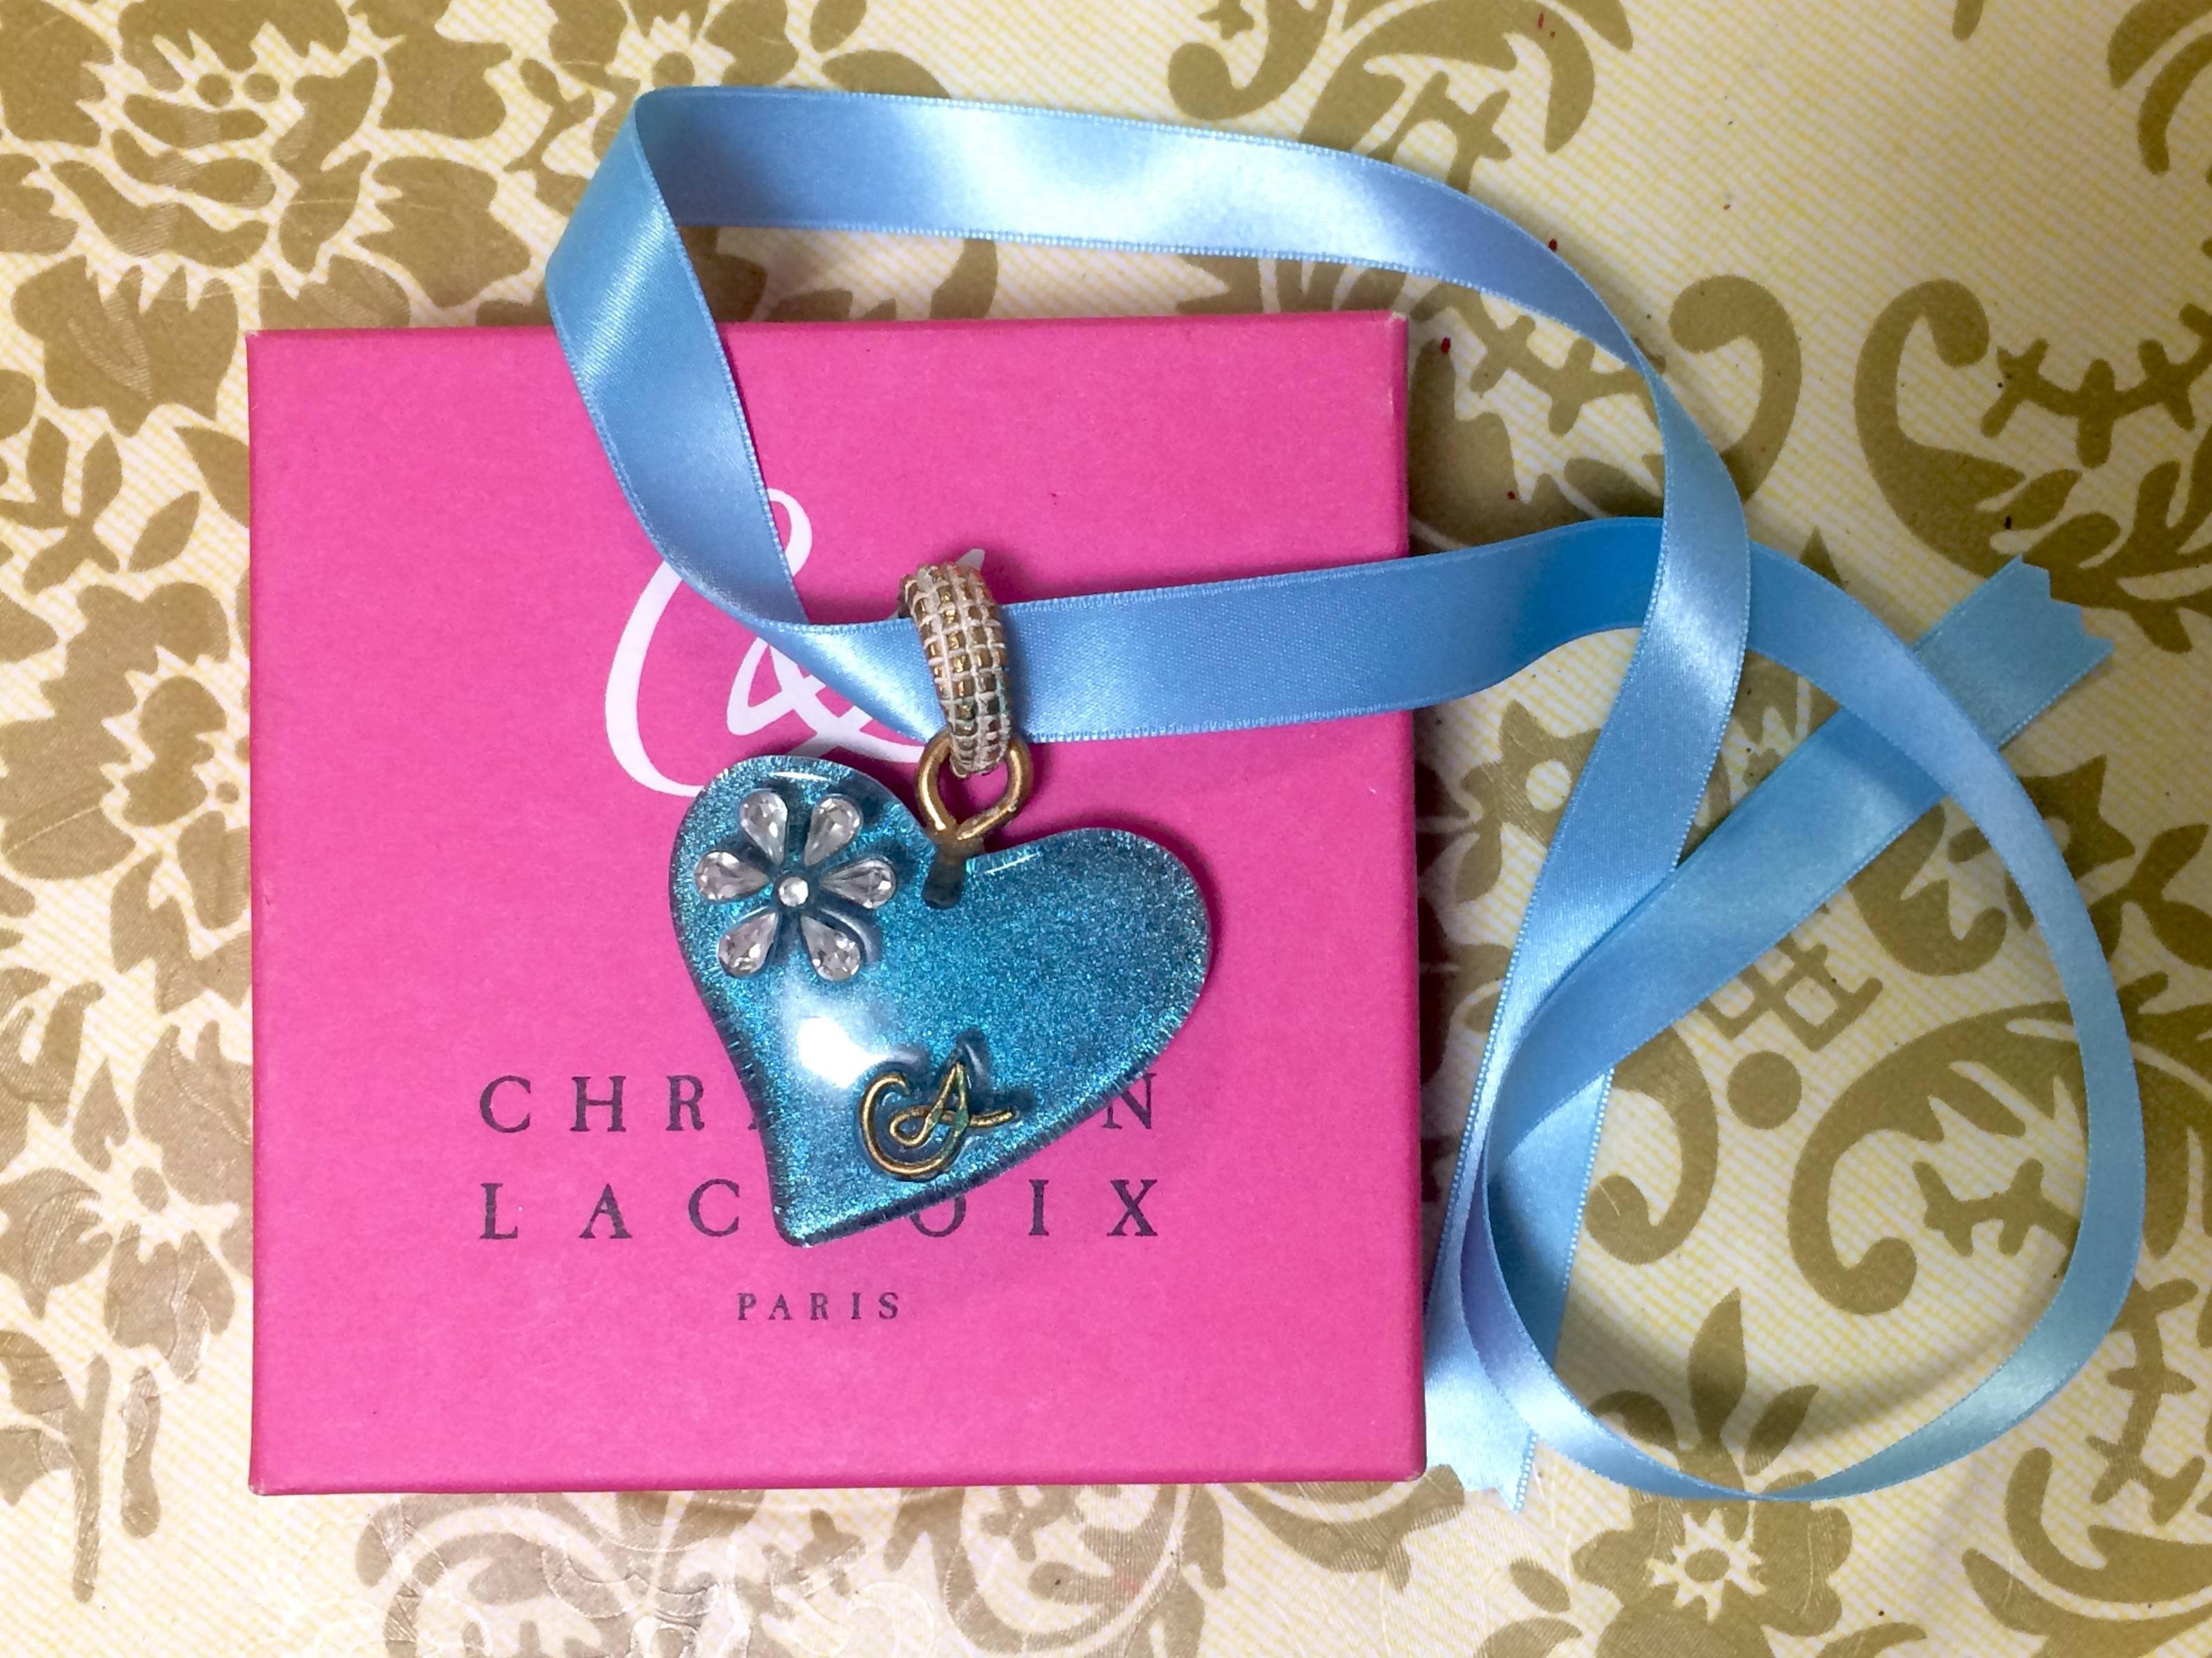 1990s. Vintage Christian Lacroix blue ribbon choker necklace with large blue lame heart pendant top.

Introducing another fabulous and unique vintage jewelry piece from Christian Lacroix from 90's. 

Featuring a plastic large heart lame pendant top